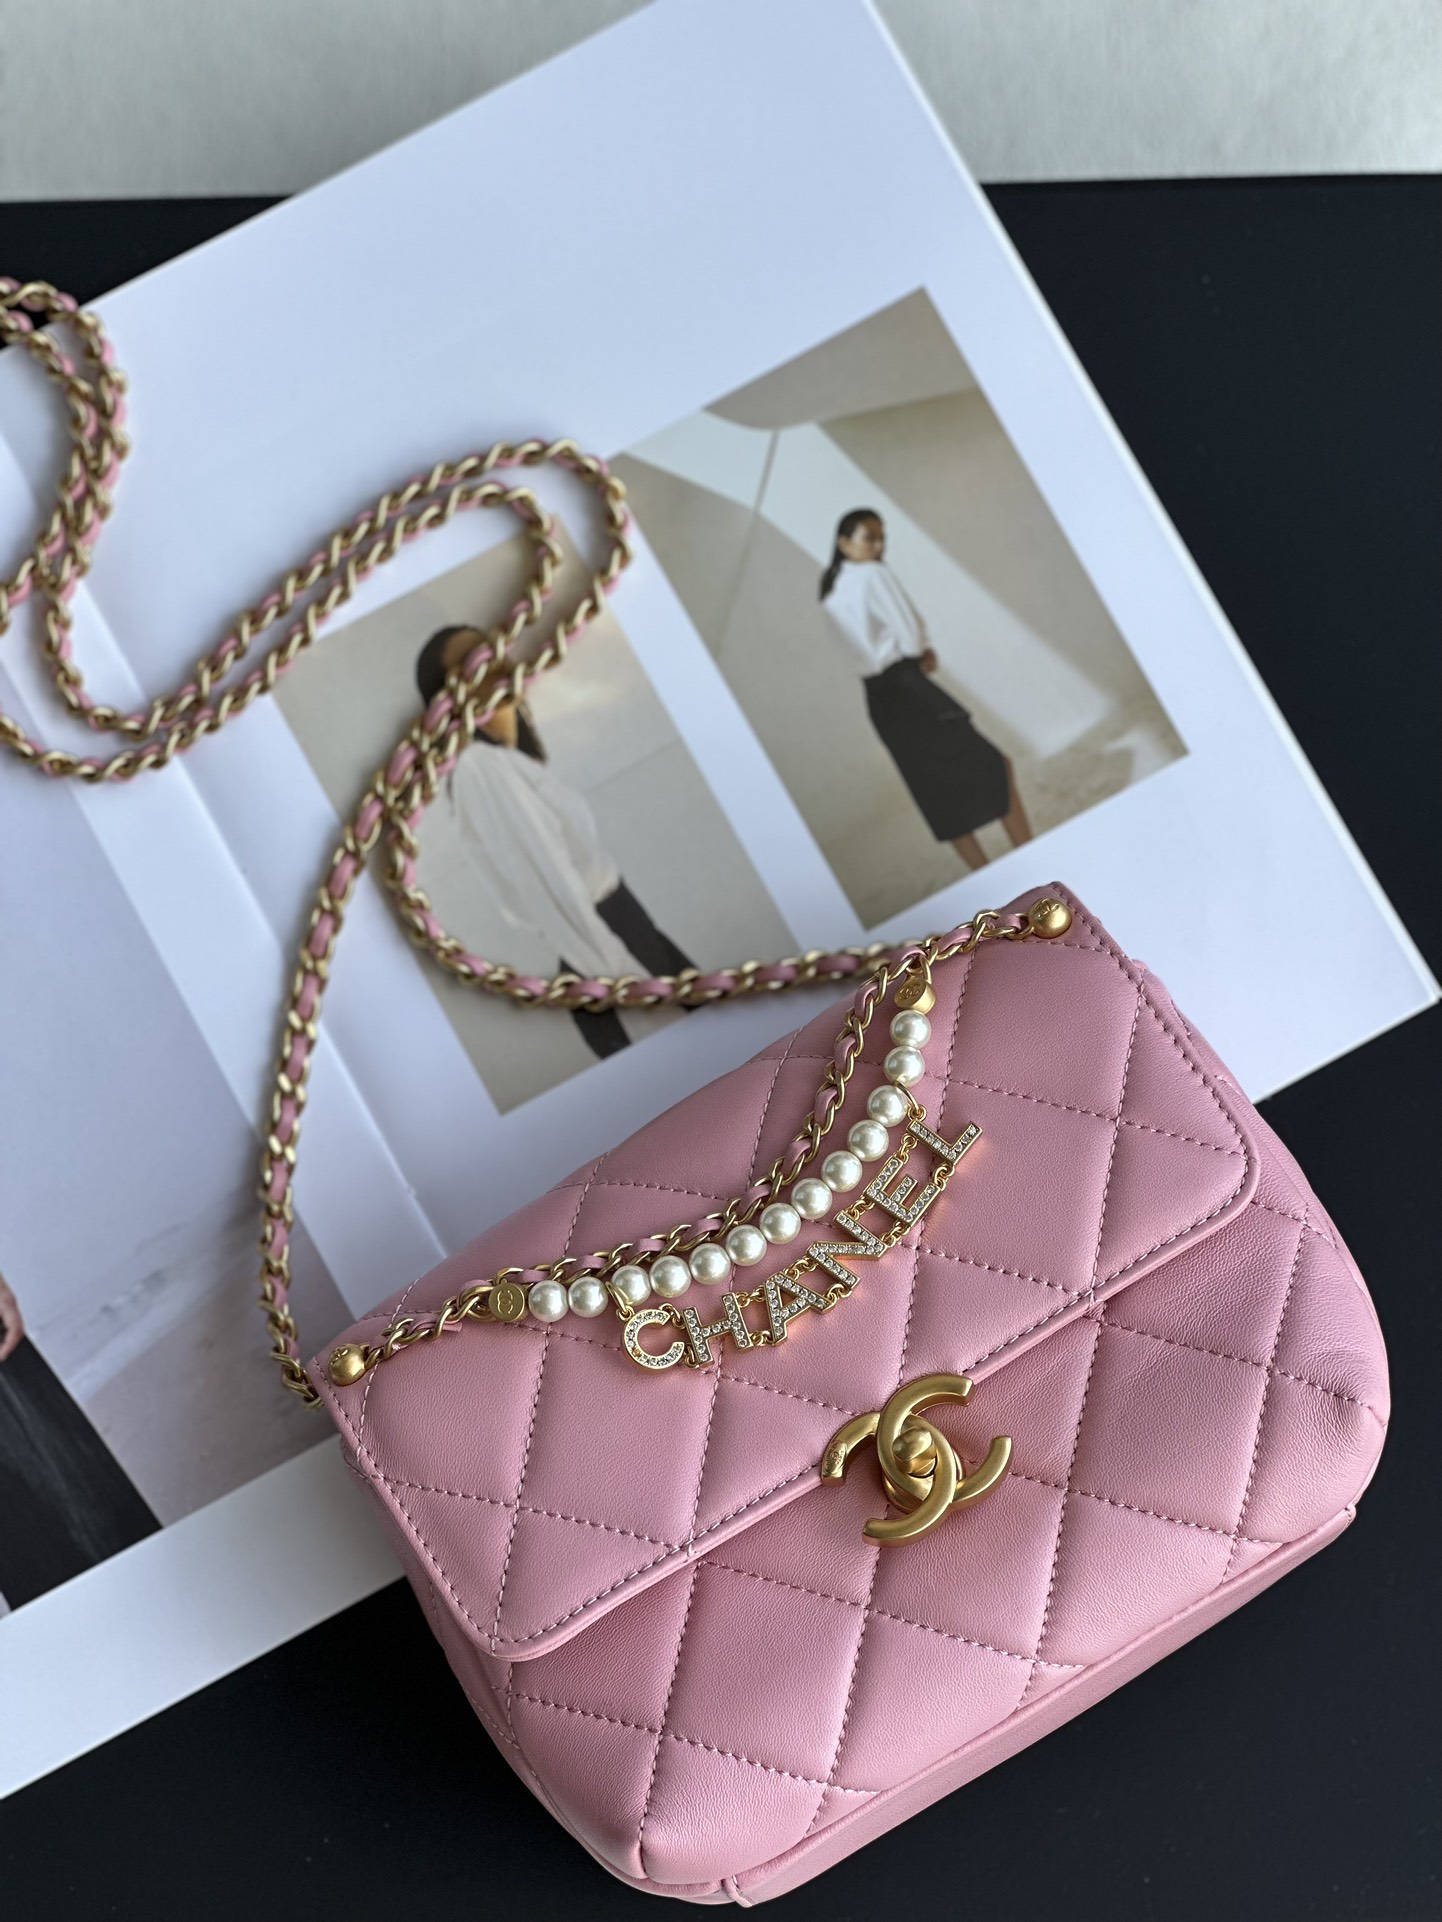 Chanel Classic Flap Bag Fashion
 Crossbody & Shoulder Bags Pink Chains